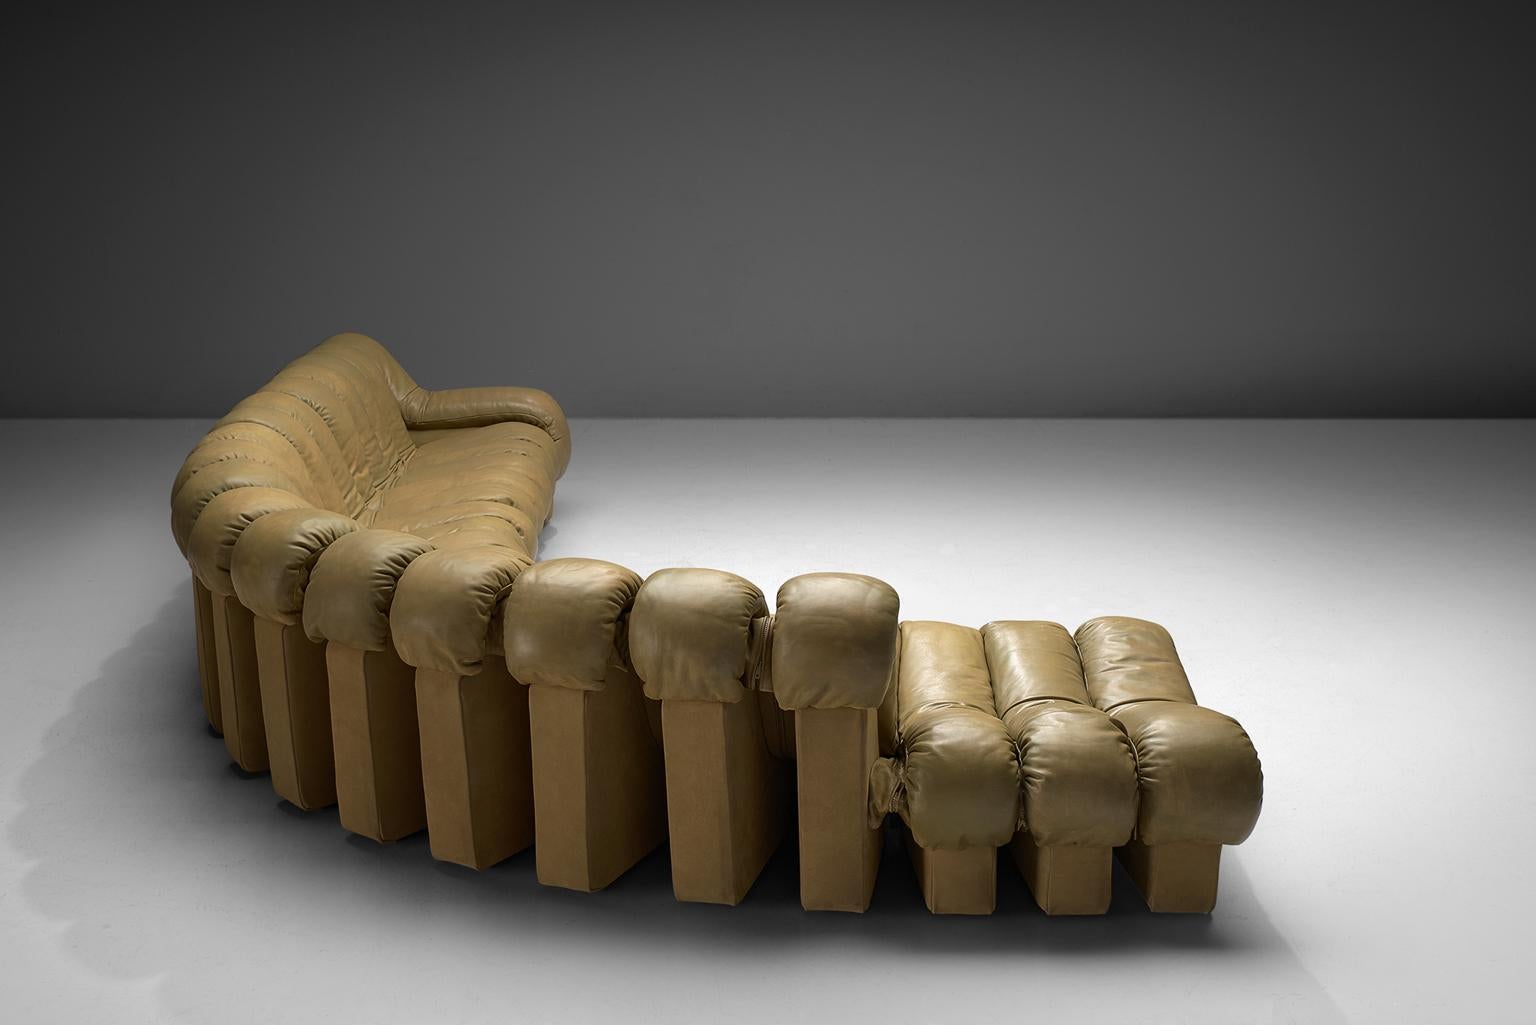 De Sede ‘Snake’ DS-600, in beige colored leather and beige, Switzerland, 1972. 

De Sede 'Non Stop' sectional sofa containing 20 pieces in beige colored leather, of which 16 centre pieces, 3 ottomans and one higher armrest. Any number of pieces can